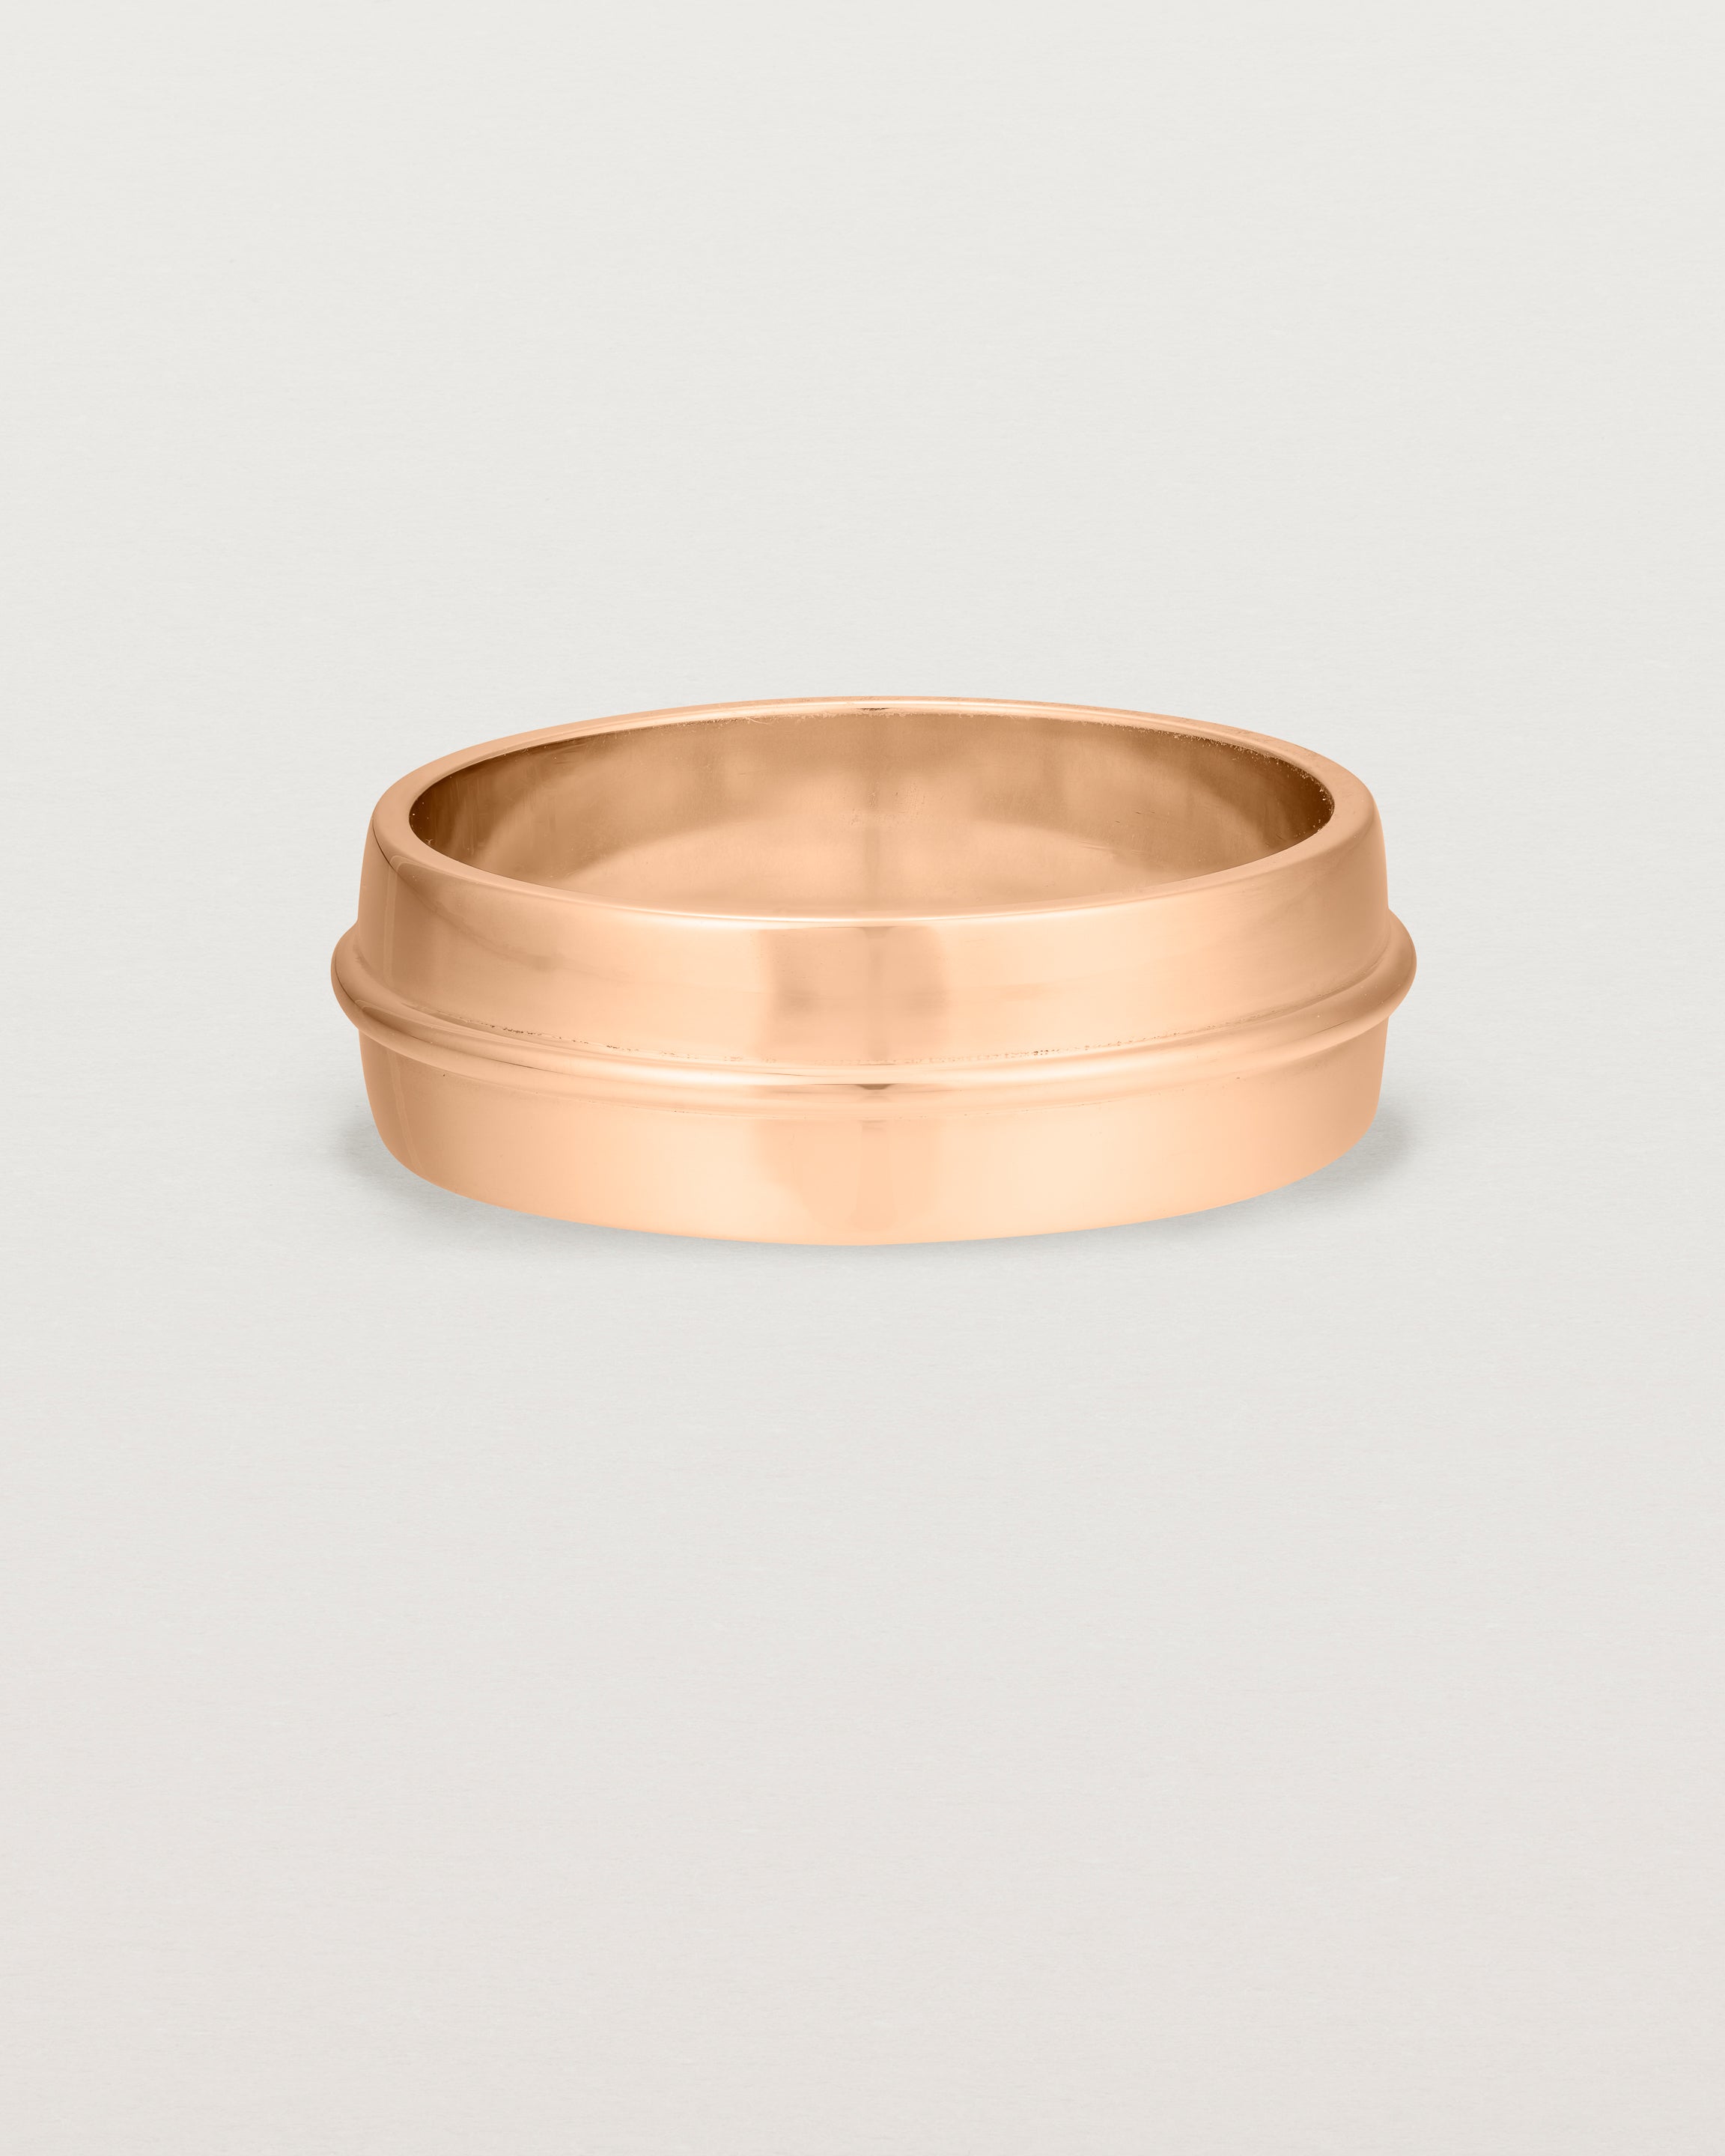 Front view of the Seam Wedding Ring | 7mm | Rose Gold.